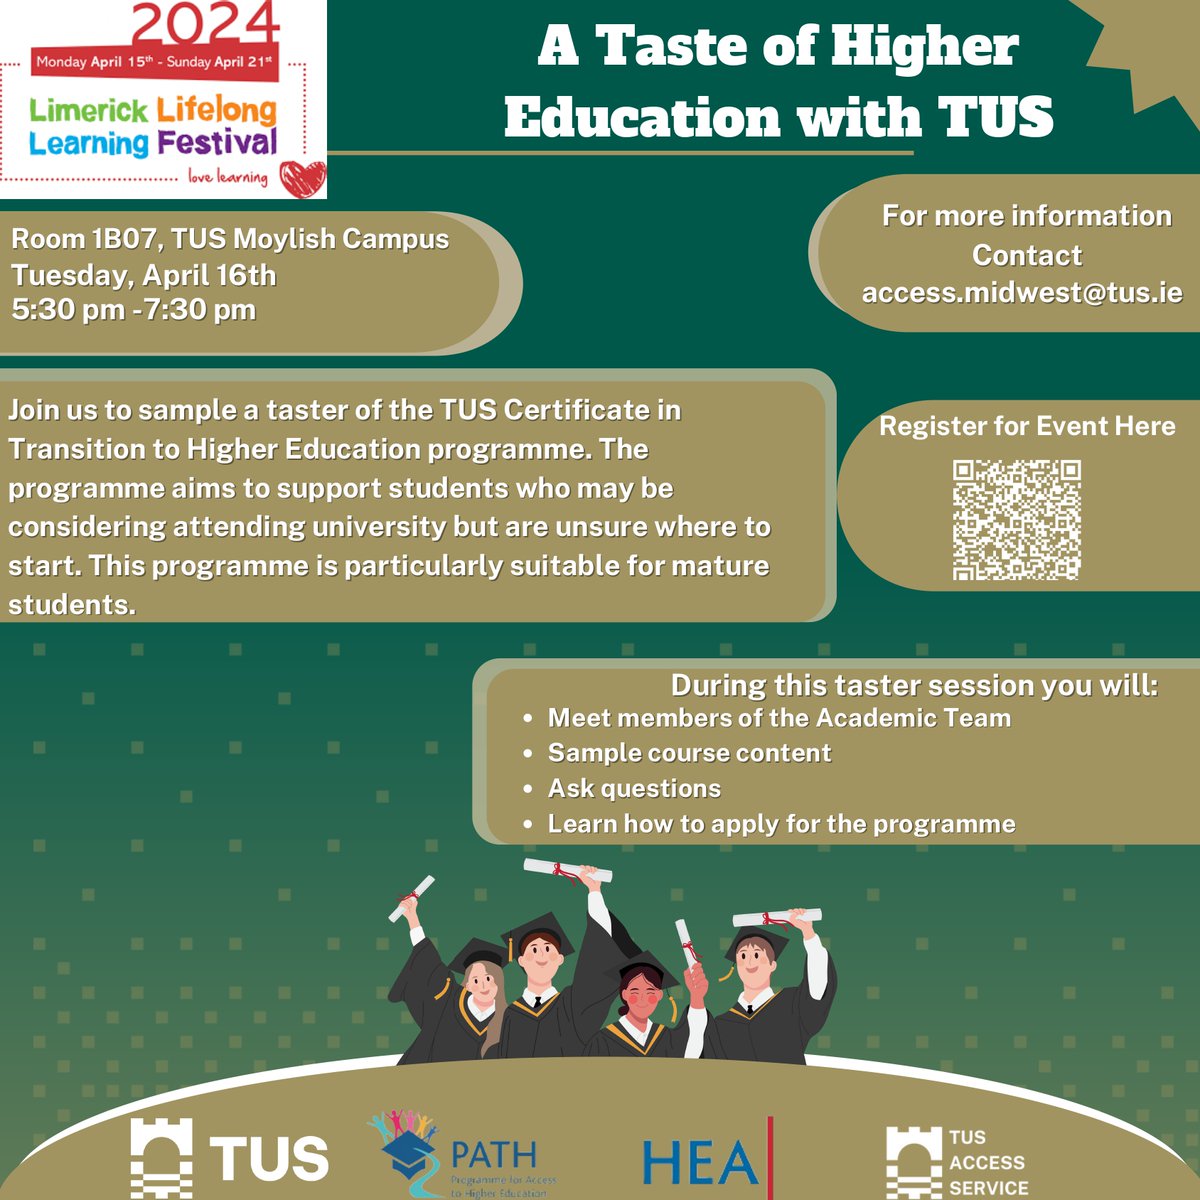 This week we are celebrating @LimkLearnFest. We have a variety of resources and guides to assist learning and education. 'A Taste of Higher Education' will take place in Moylish Library tomorrow at 5.30pm, please see poster for more info. limerick.ie/LoveLearning